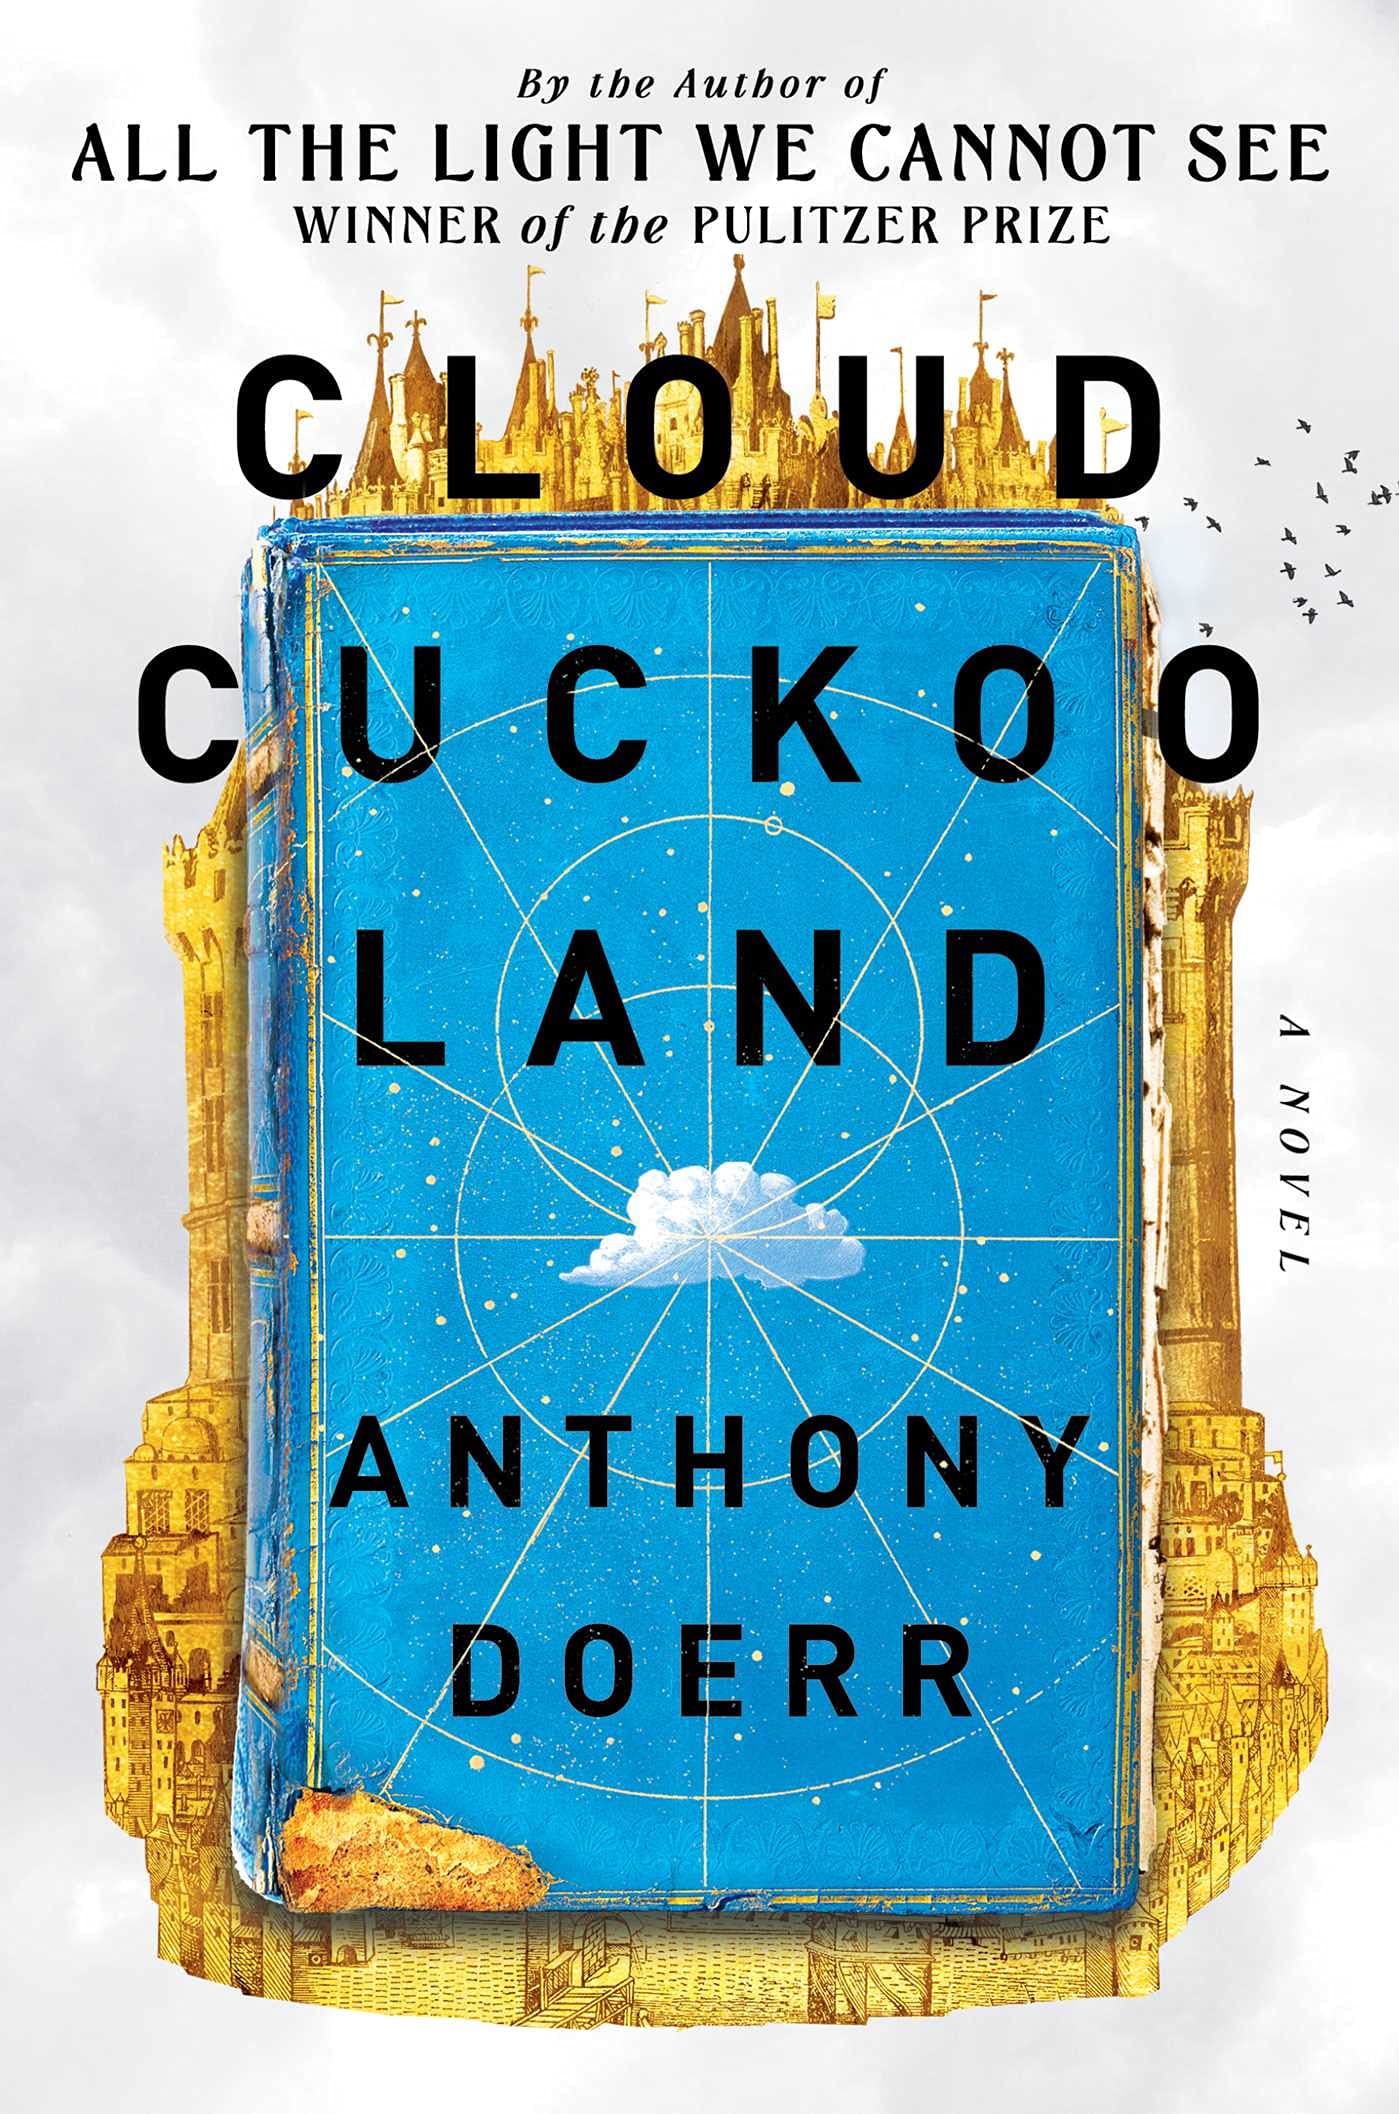 Live event with Anthony Doerr/Cloud Cuckoo Land